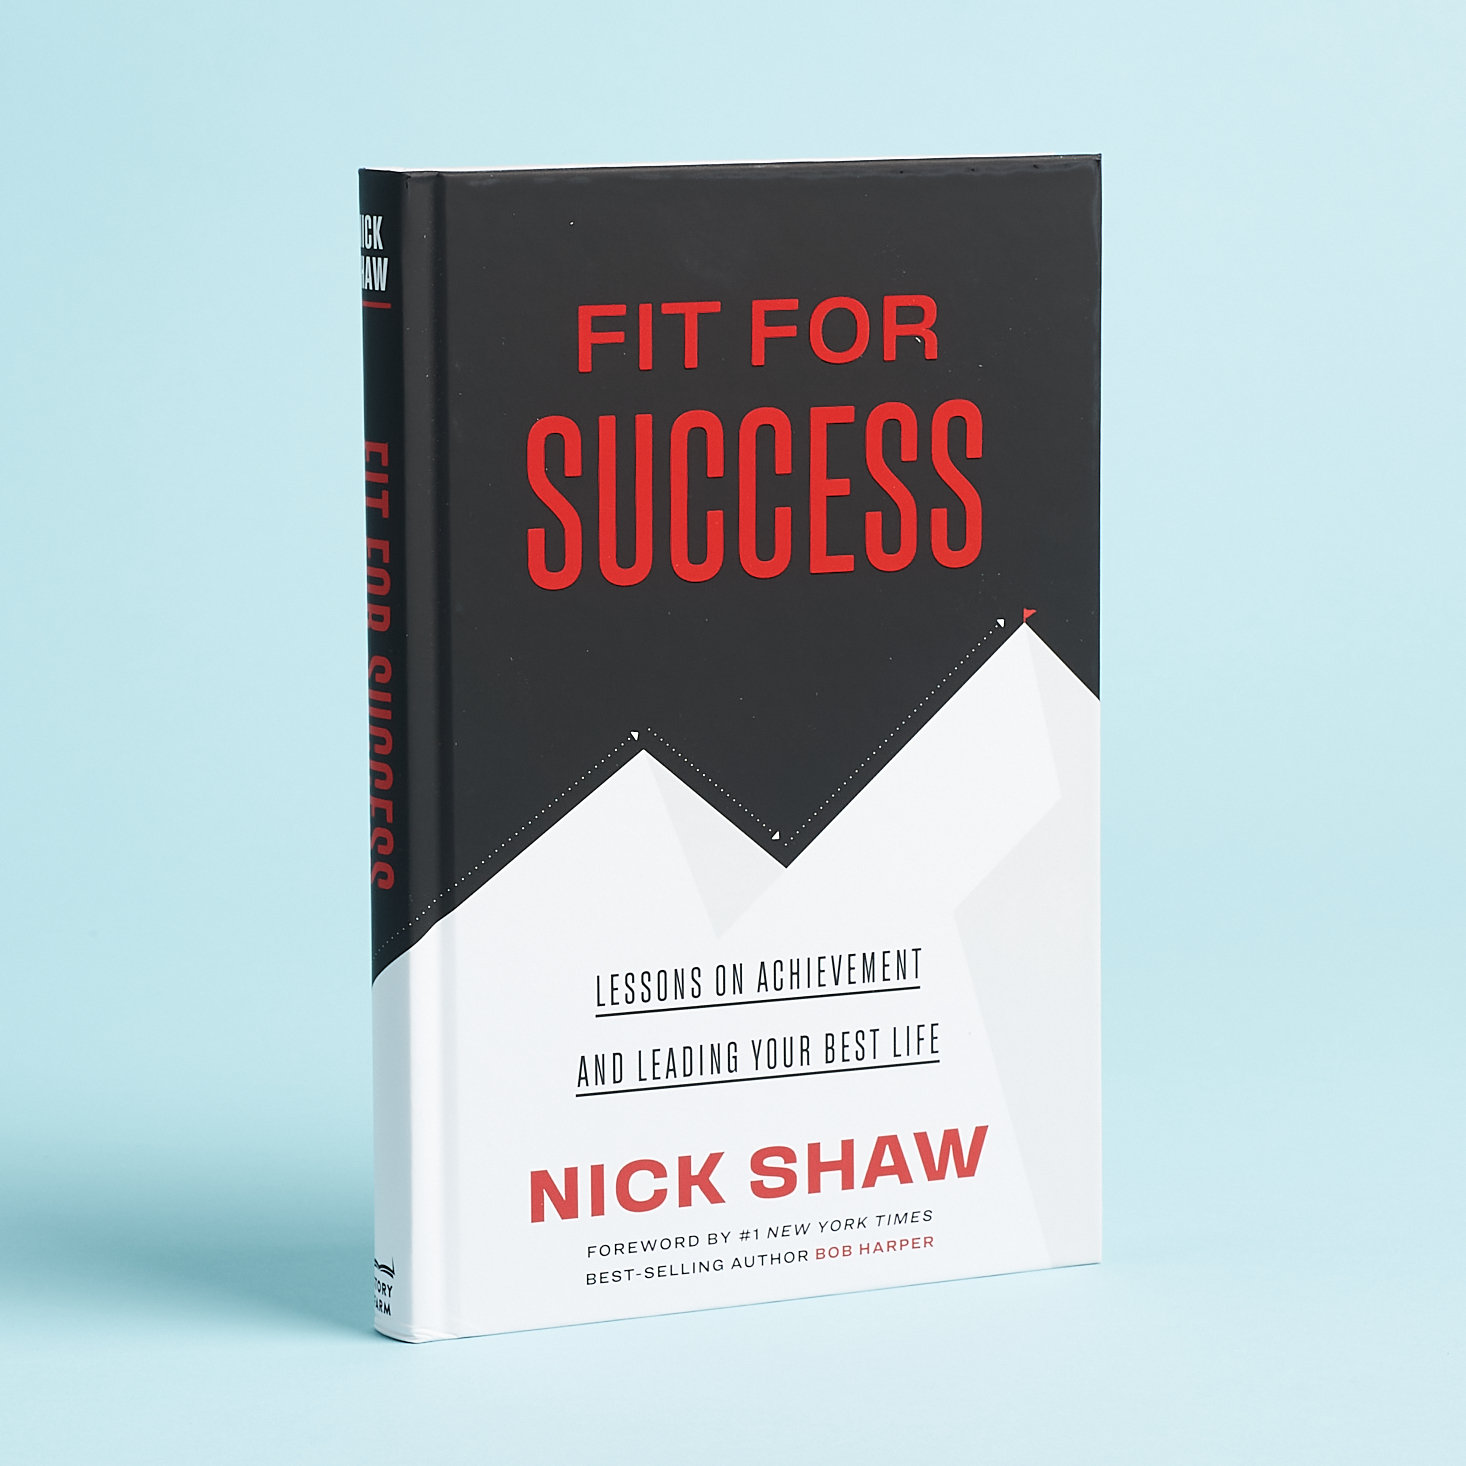 Fit for Success by Nick Shaw from Breo Box Spring 2021